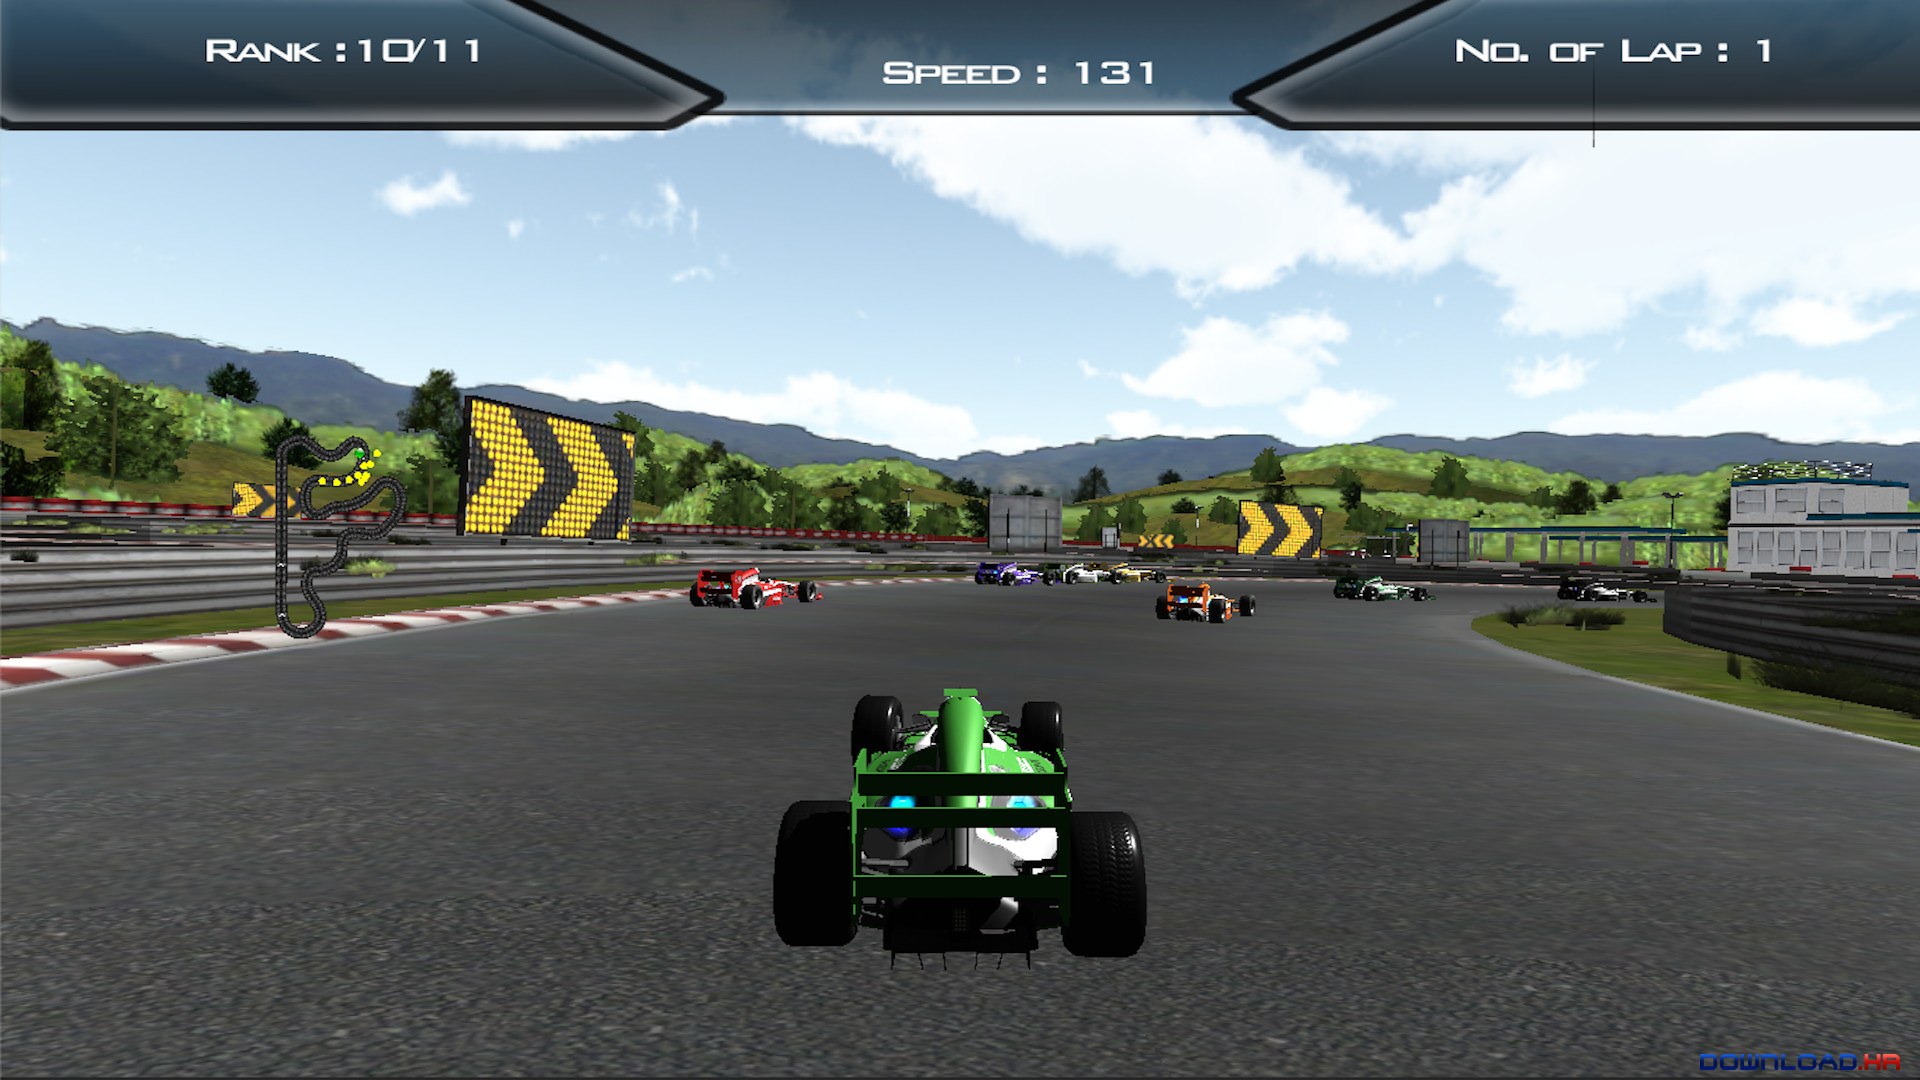 Extreme Formula Championship Demo Demo Featured Image for Version Demo